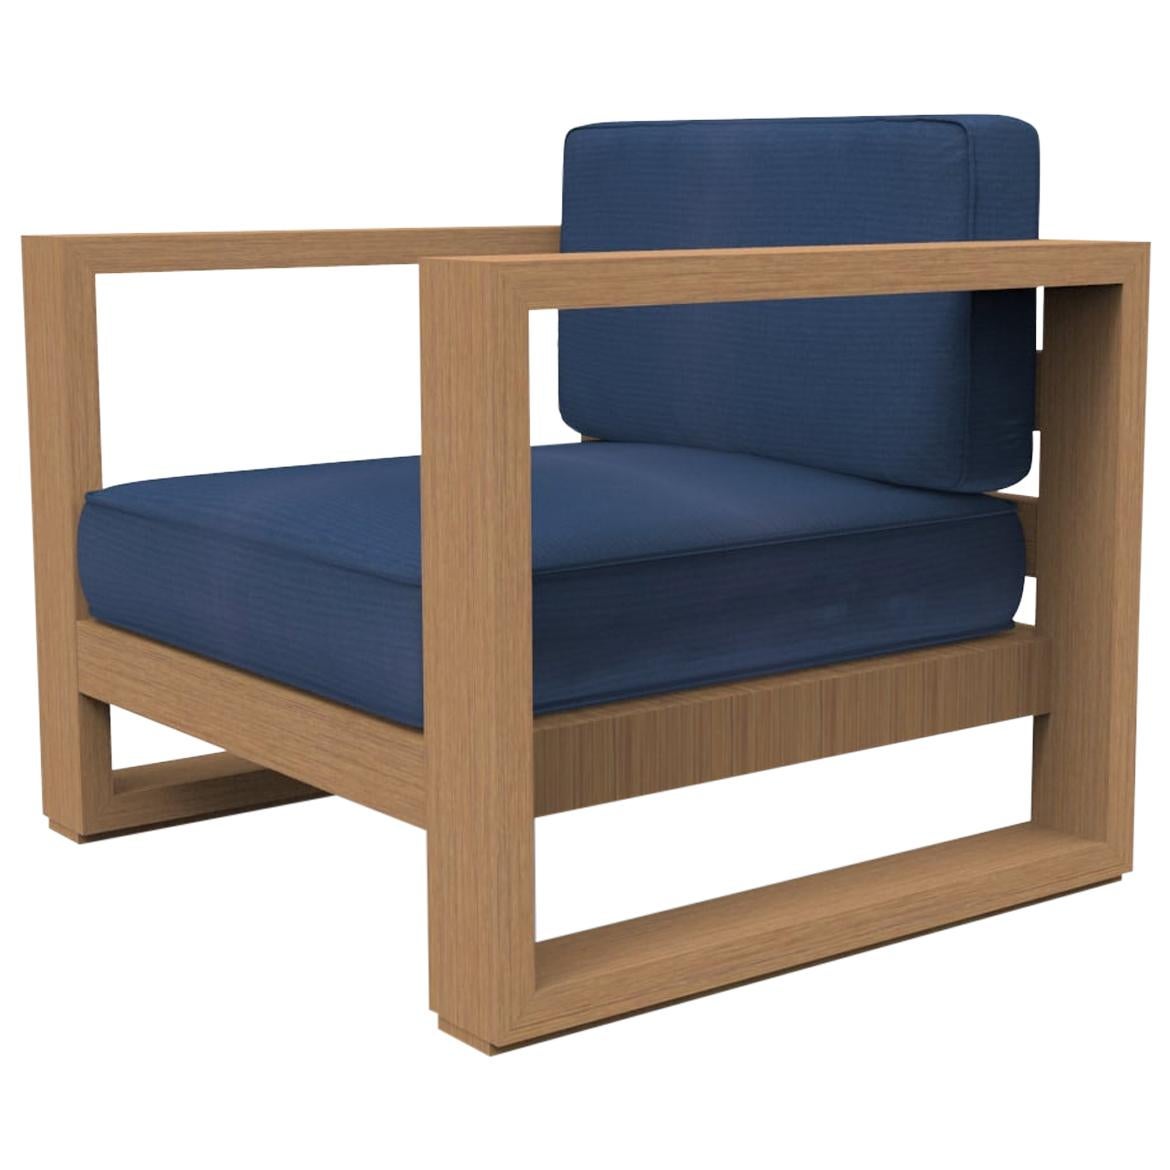 Brixton Teak Lounge Chair 'Grade A': Wire Brushed Natural Wood, Canvas Navy For Sale